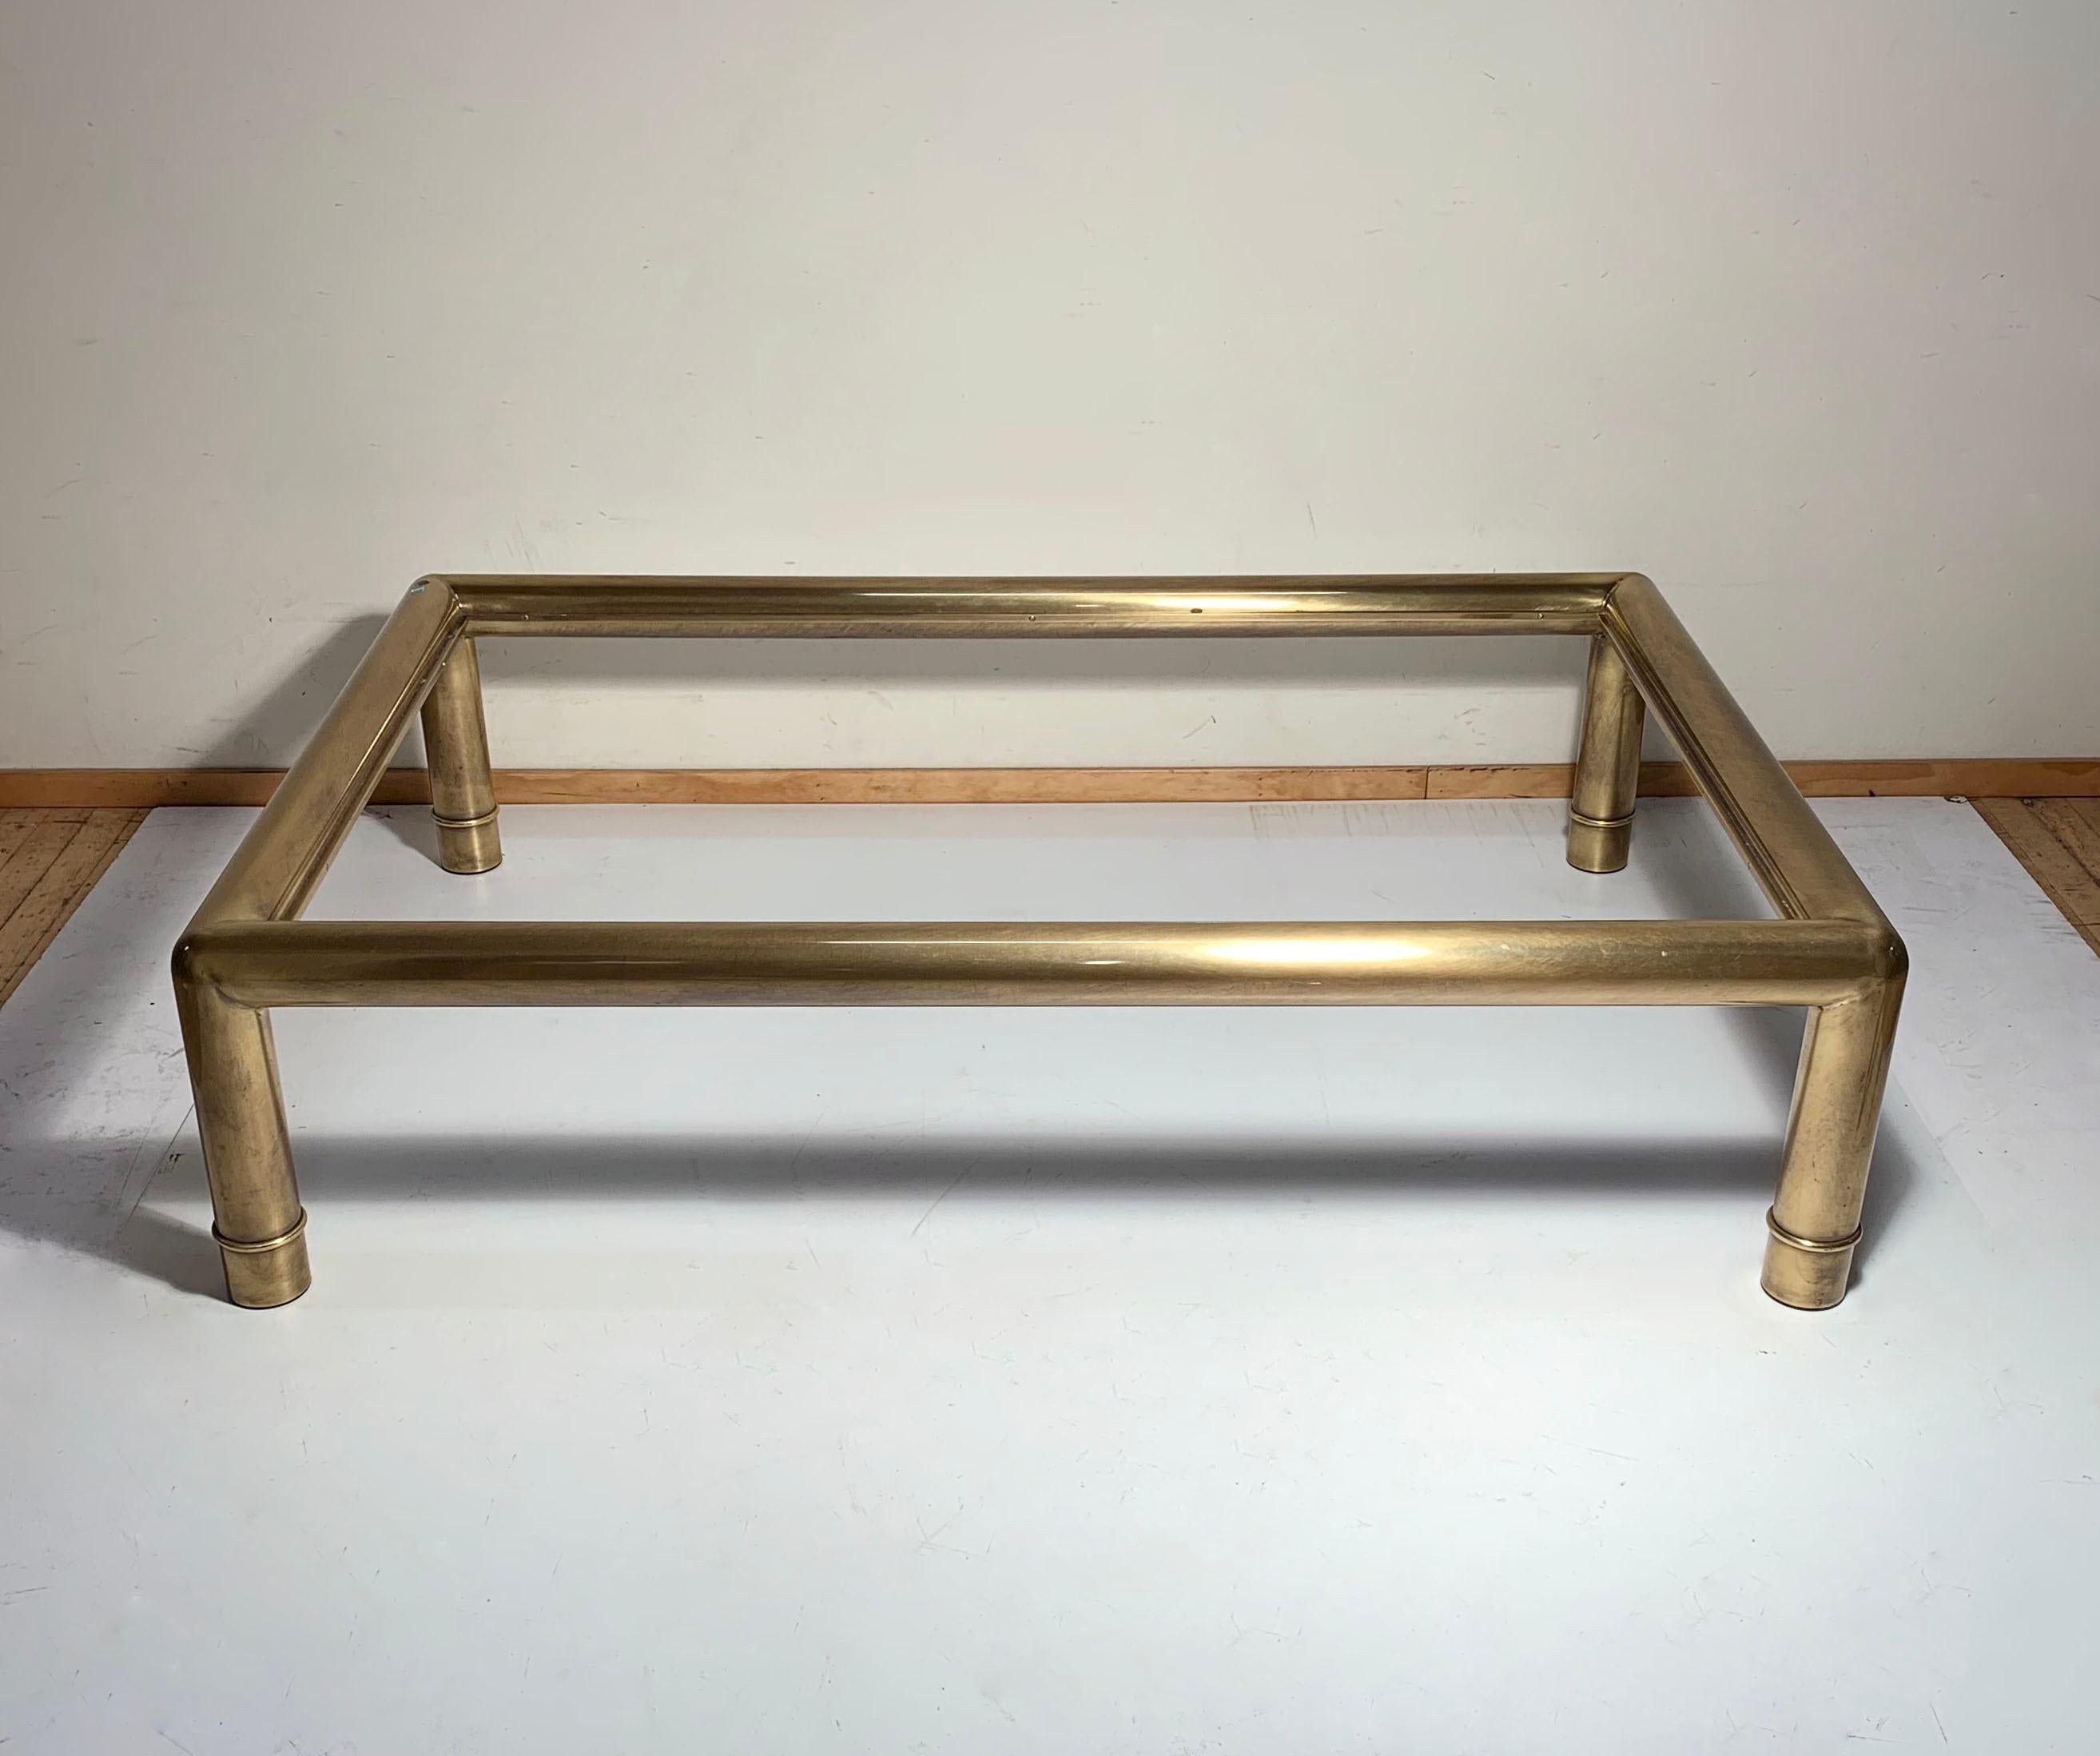 A large oversized rectangular Mastercraft brass coffee table.

Table comes with the original glass with bevelled edge.